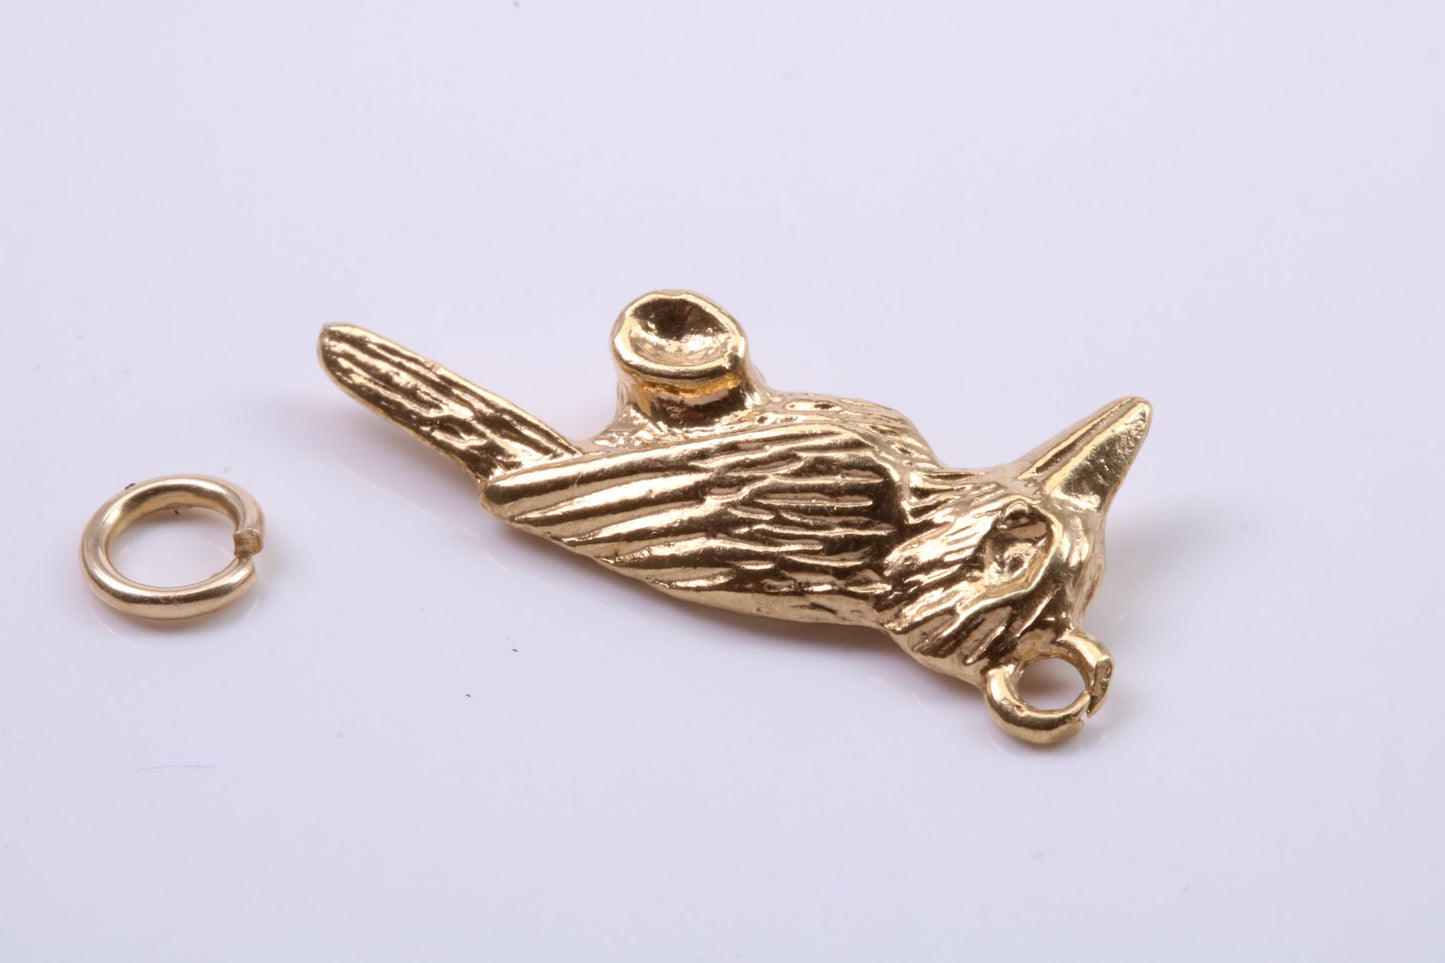 Raven Charm, Traditional Charm, Made from Solid 9ct Yellow Gold, British Hallmarked, Complete with Attachment Link